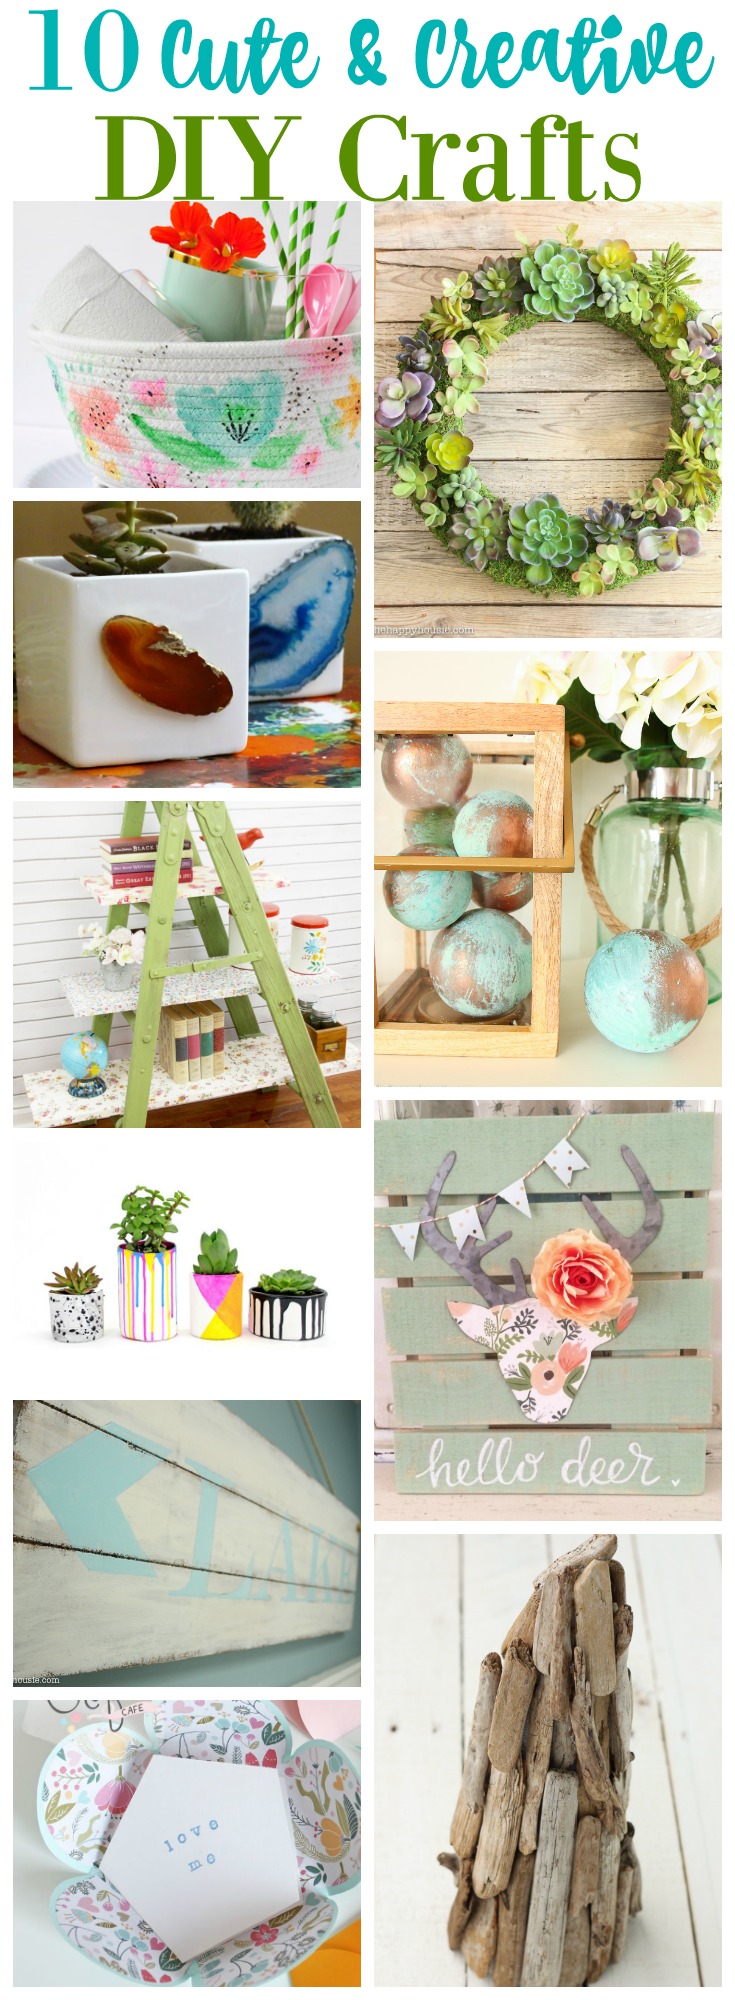 10 Cute & Creative DIY Projects poster.